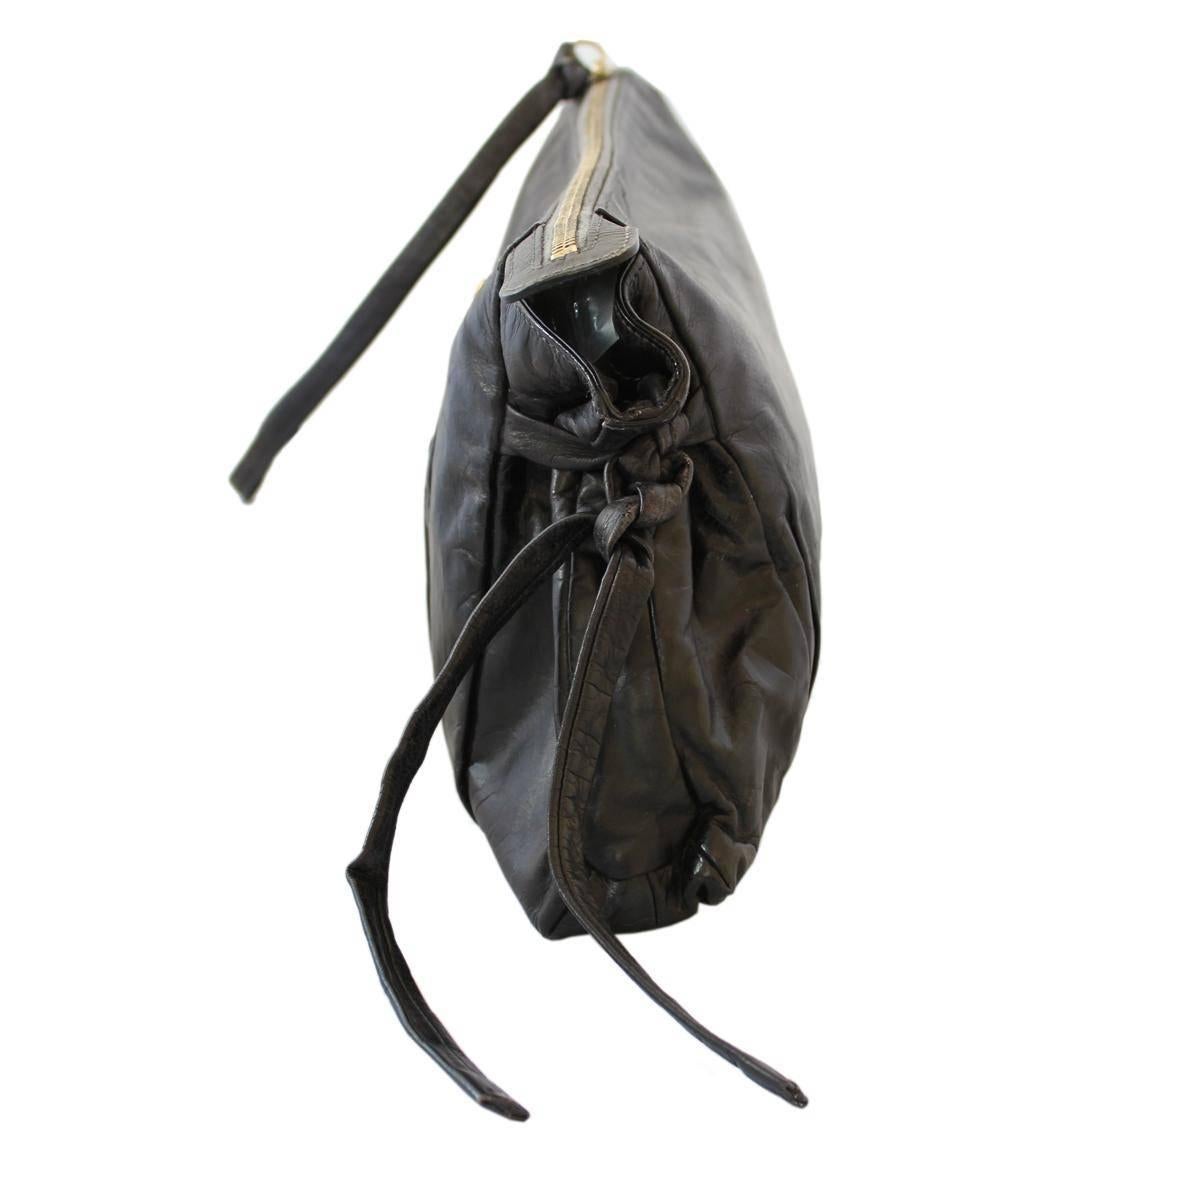 Leather
Black color
Golden brass Logo
Zip closure
Internal zip pocket
Cm 38 x 22 x 7 (14.9 x 8.7 x 2.8 inches)
With dustbag
Worldwide express shipping included in the price !